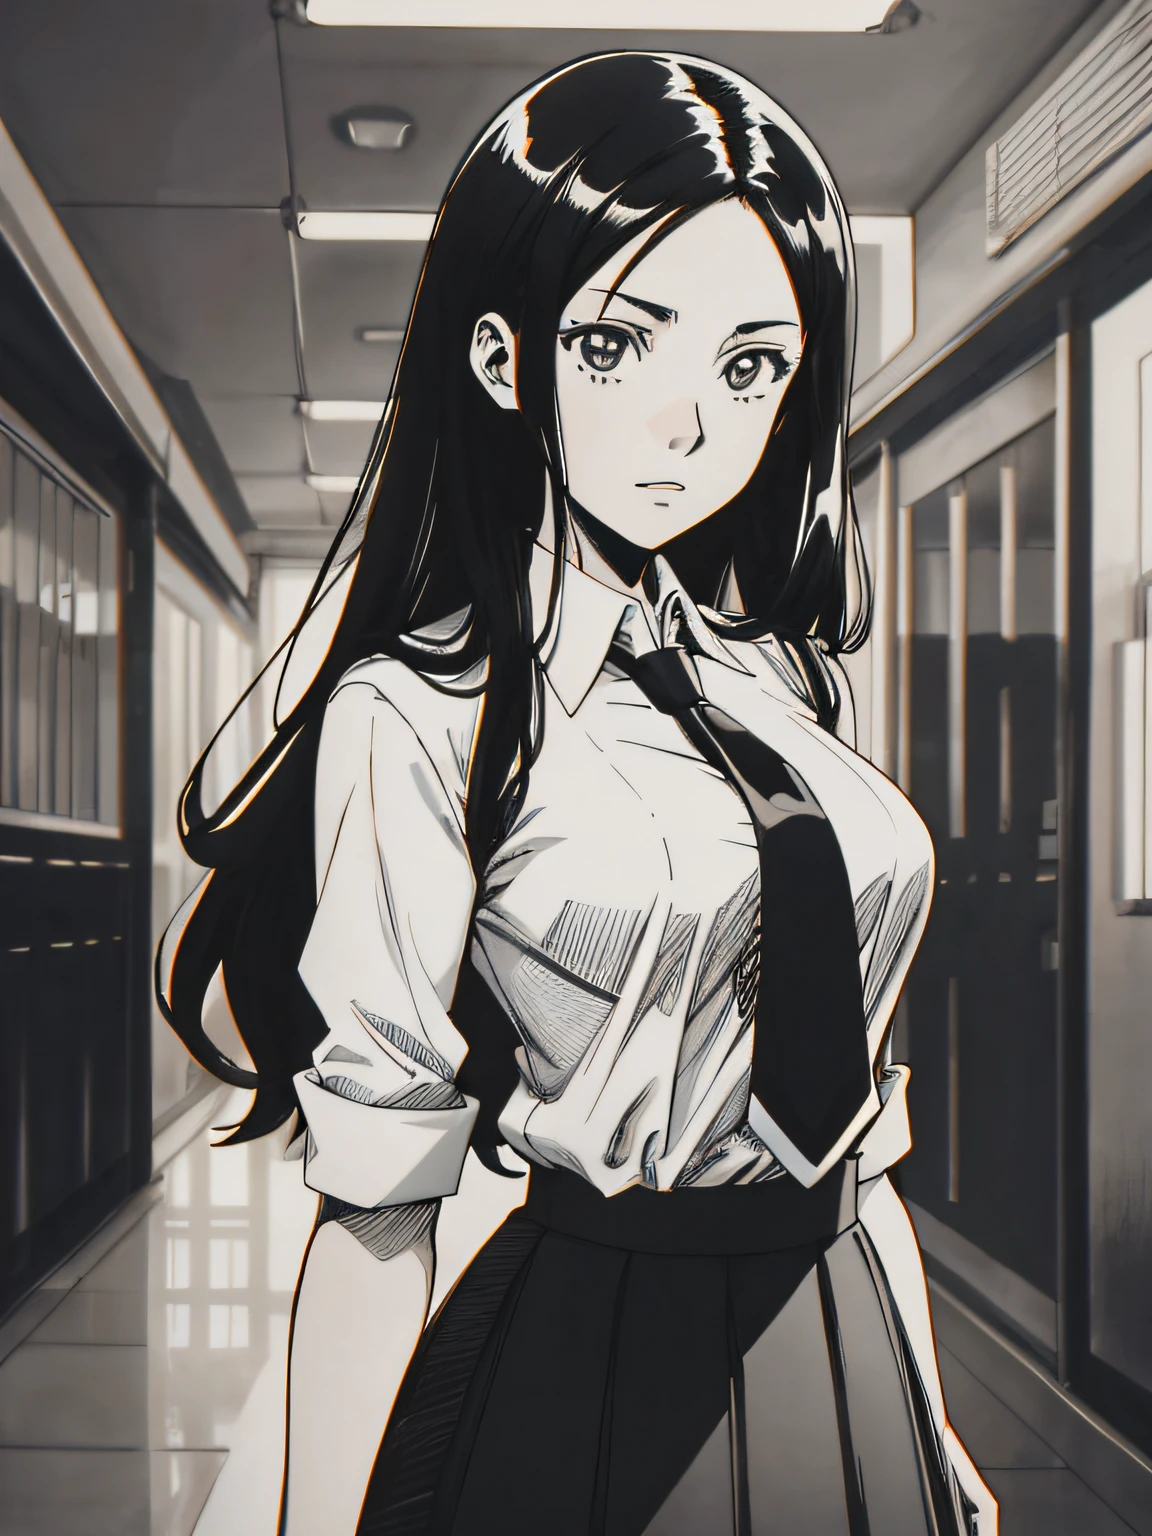 of the highest quality, Best Quality,超A high resolution, hight resolution, (masutepiece), (Comic style illustration), (linear art_Anime),(black-and-white),(monotone_highcontrast),hi-school girl,high-school uniform、neck tie、blazers、skirt by the,Inside the school_the complex background,(lora:Add More Detail:1.2)